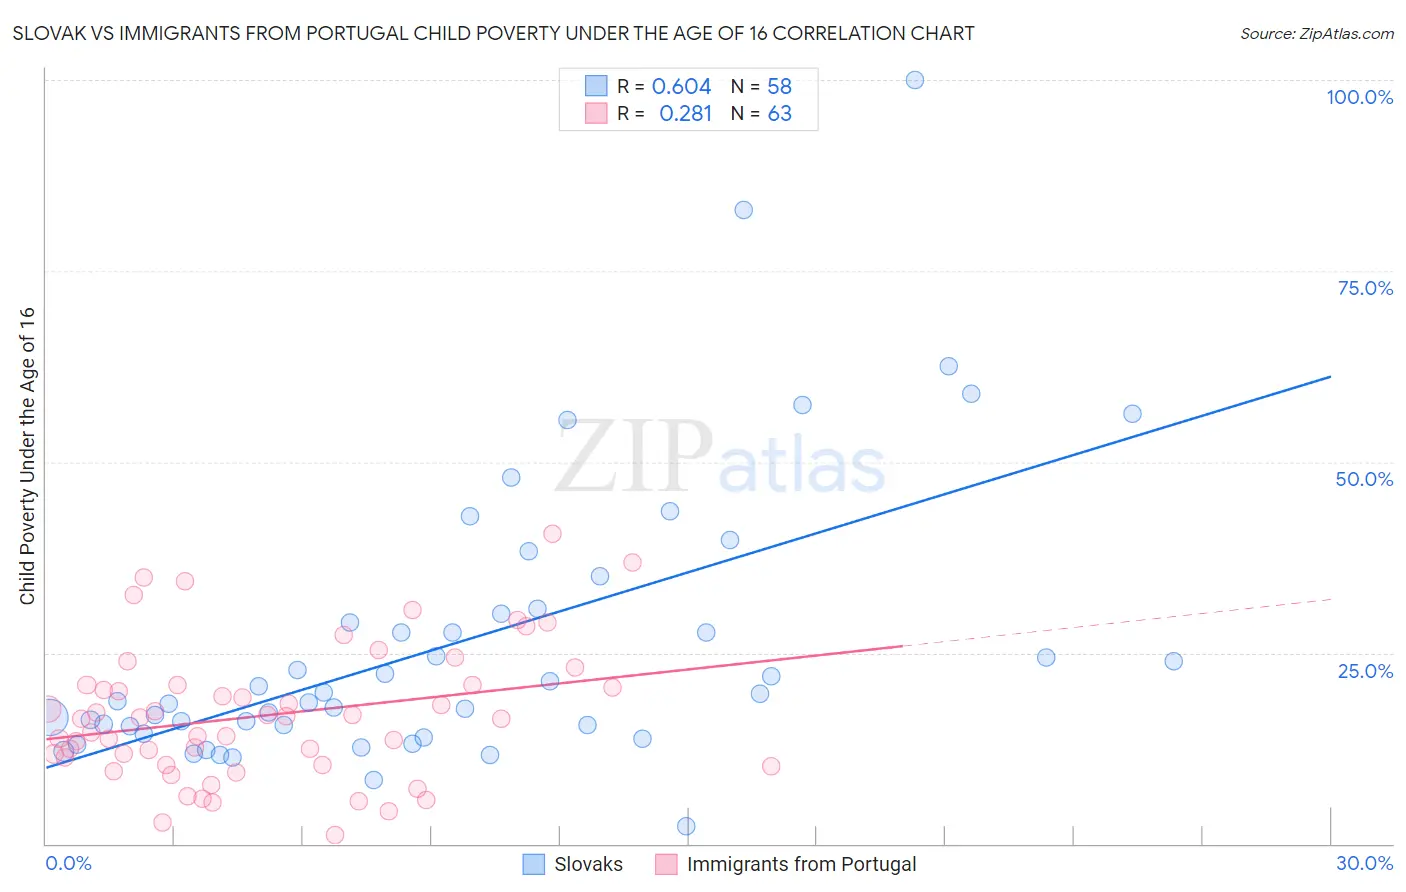 Slovak vs Immigrants from Portugal Child Poverty Under the Age of 16